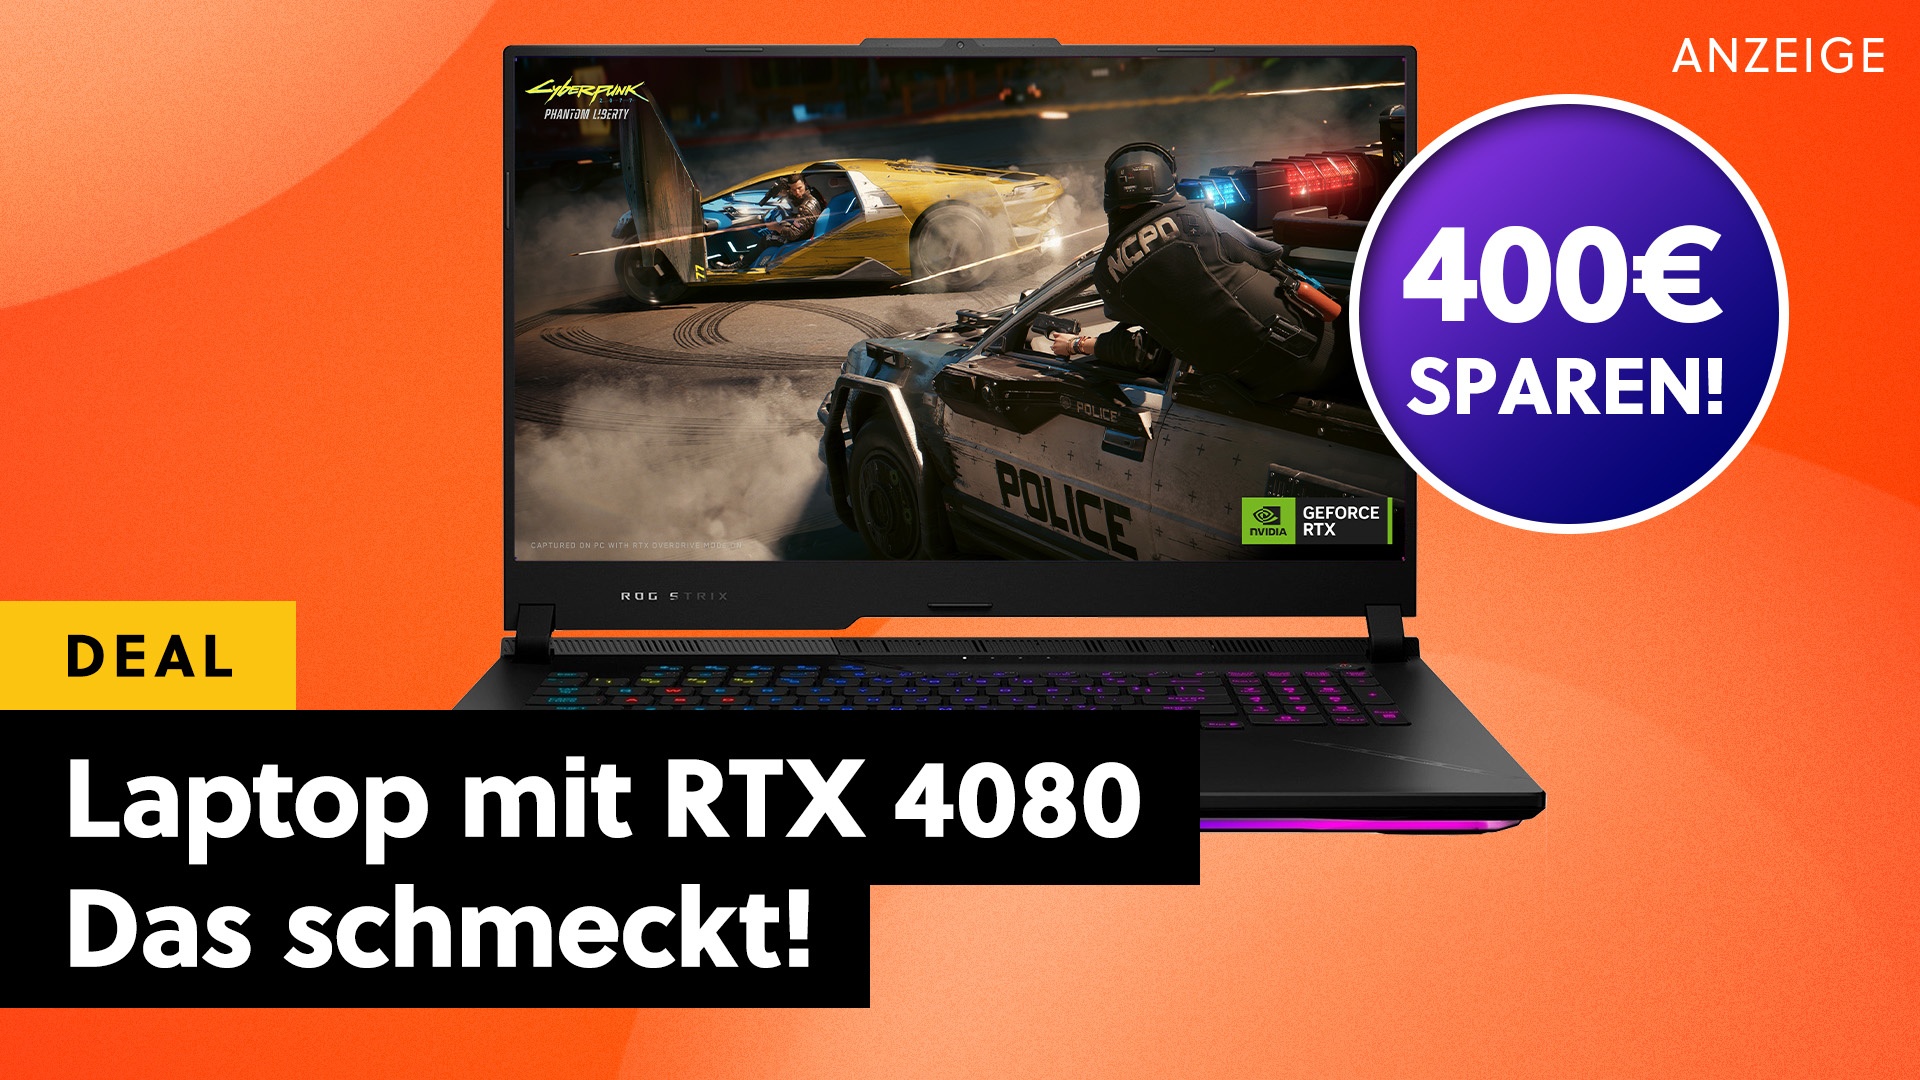 ASUS's high-end 240Hz WQHD ray tracing gaming laptop is now significantly discounted – but only until tomorrow!